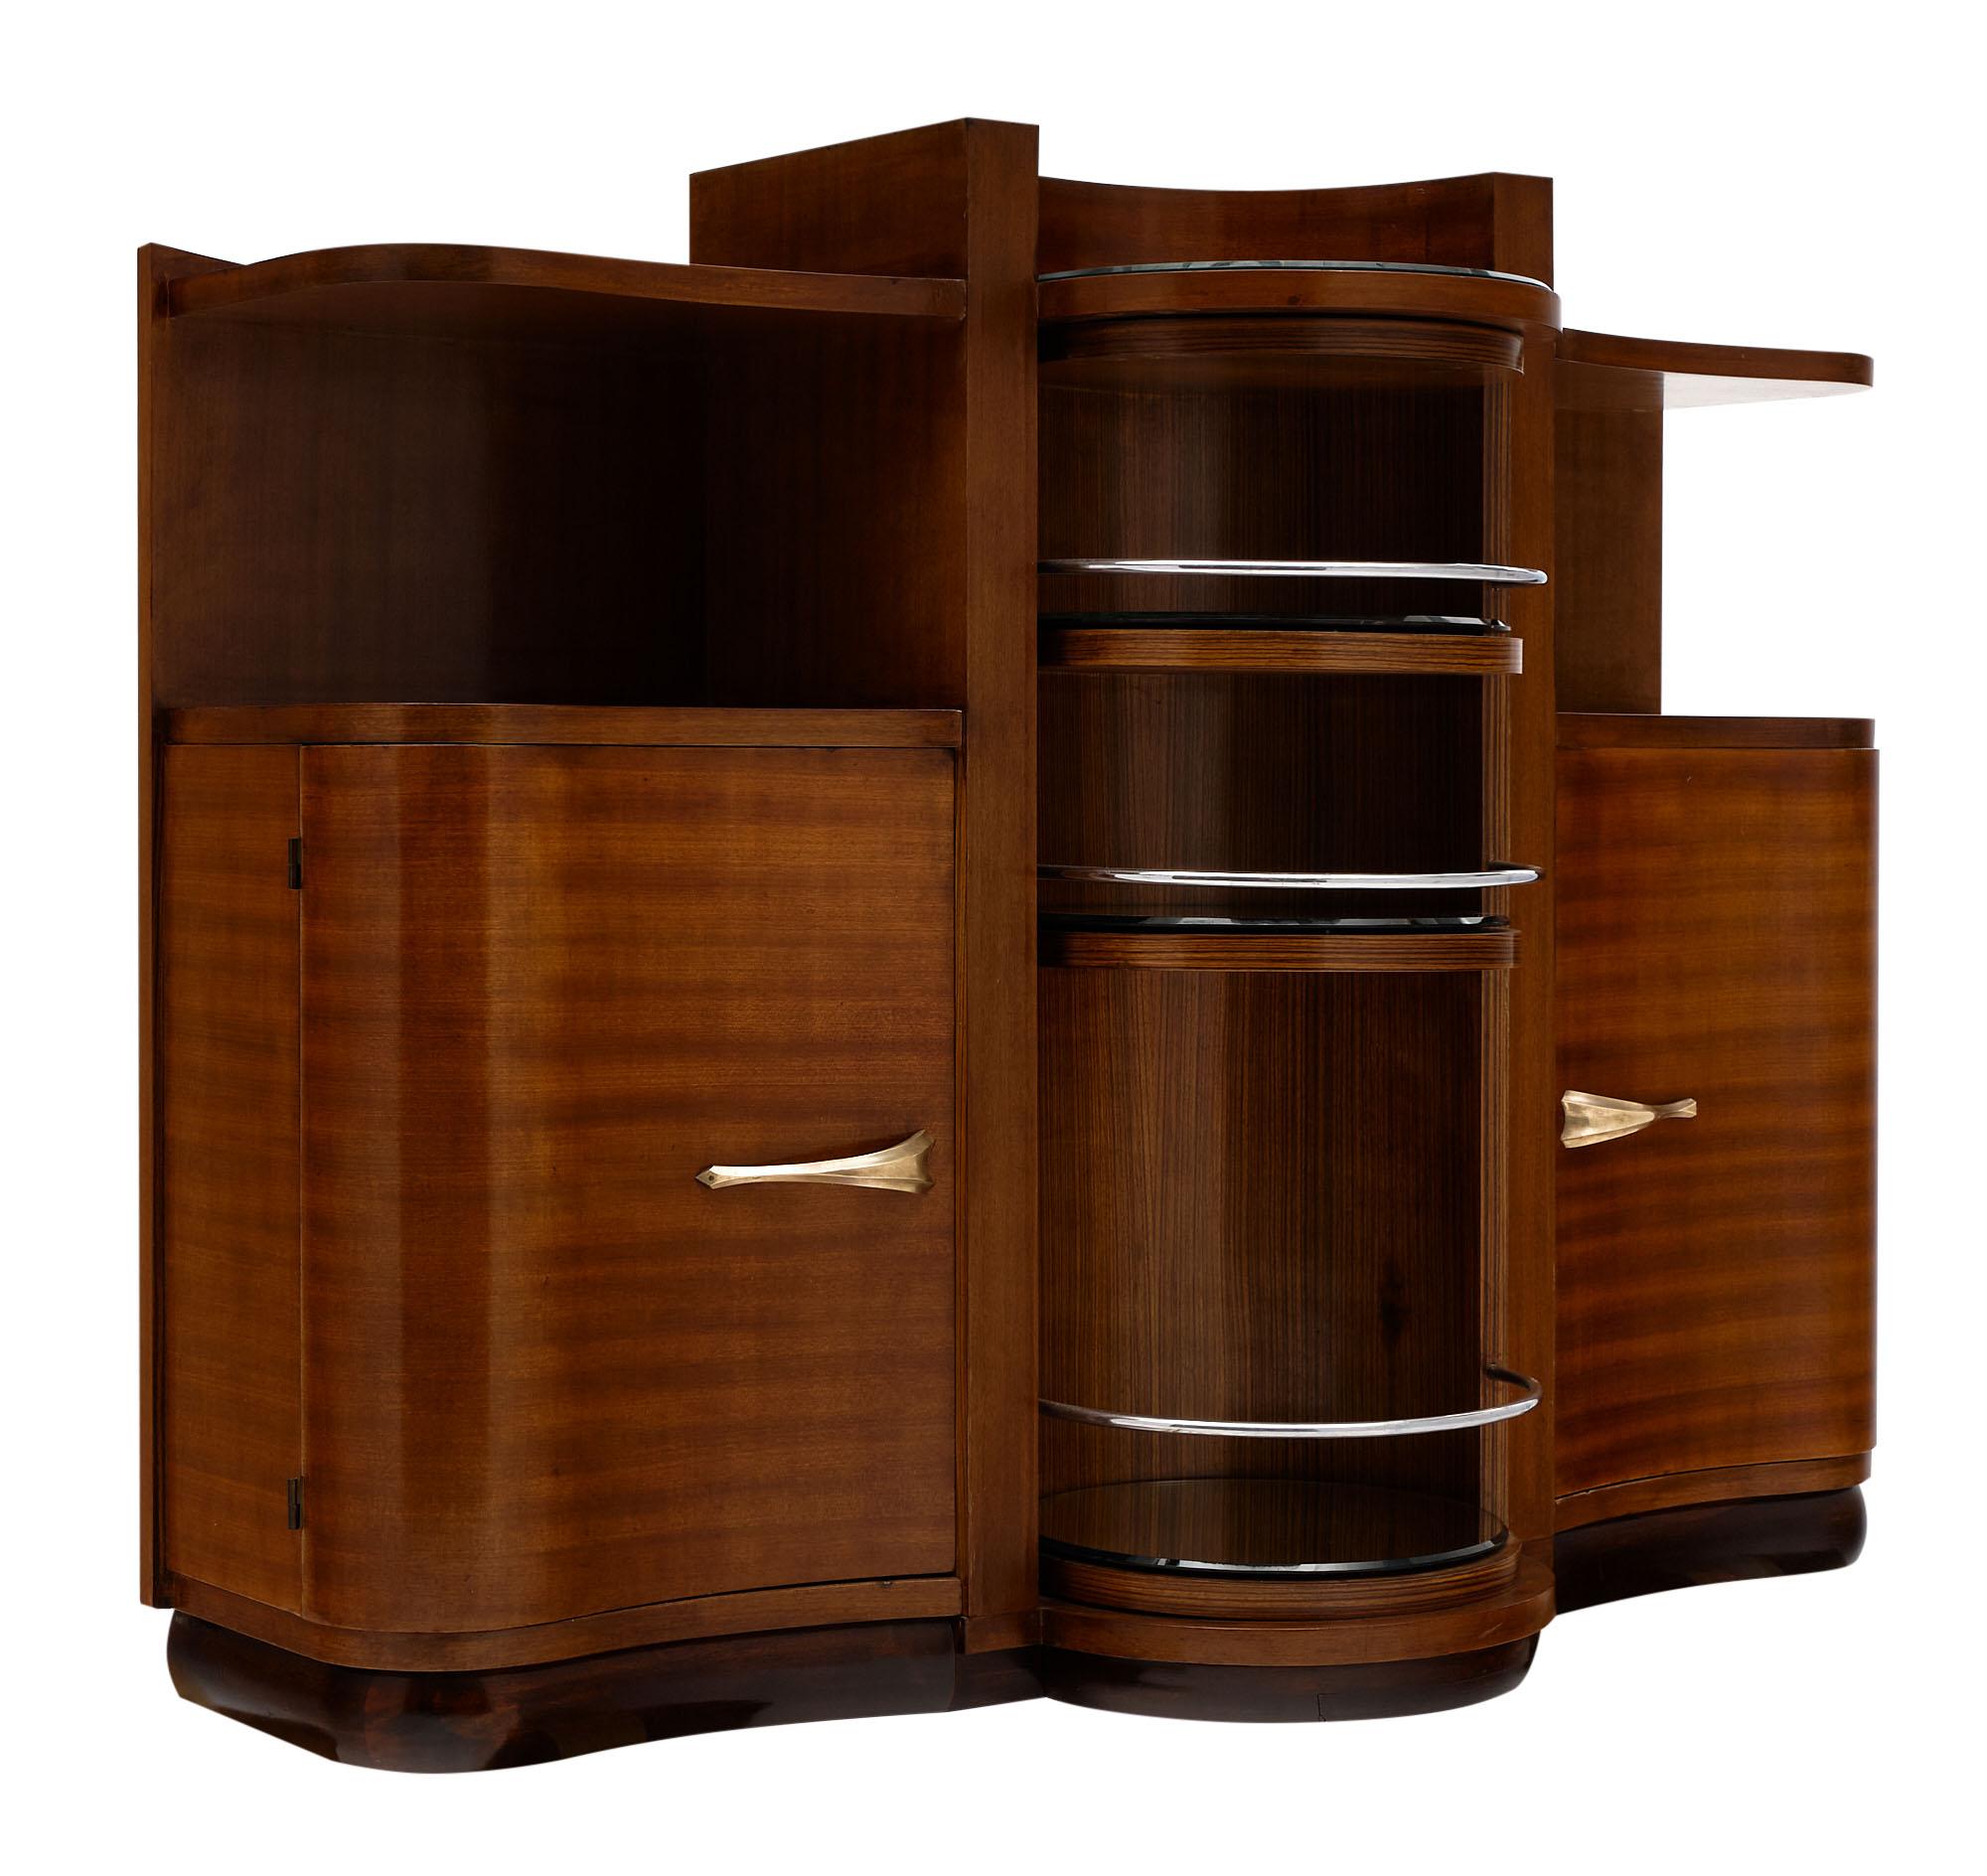 Bar cabinet - Art Deco period bar cabinet from France made of walnut with a rotating central bar section. This piece features exterior shelving and additional shelving behind the doors. We love the curve of this elegant piece!